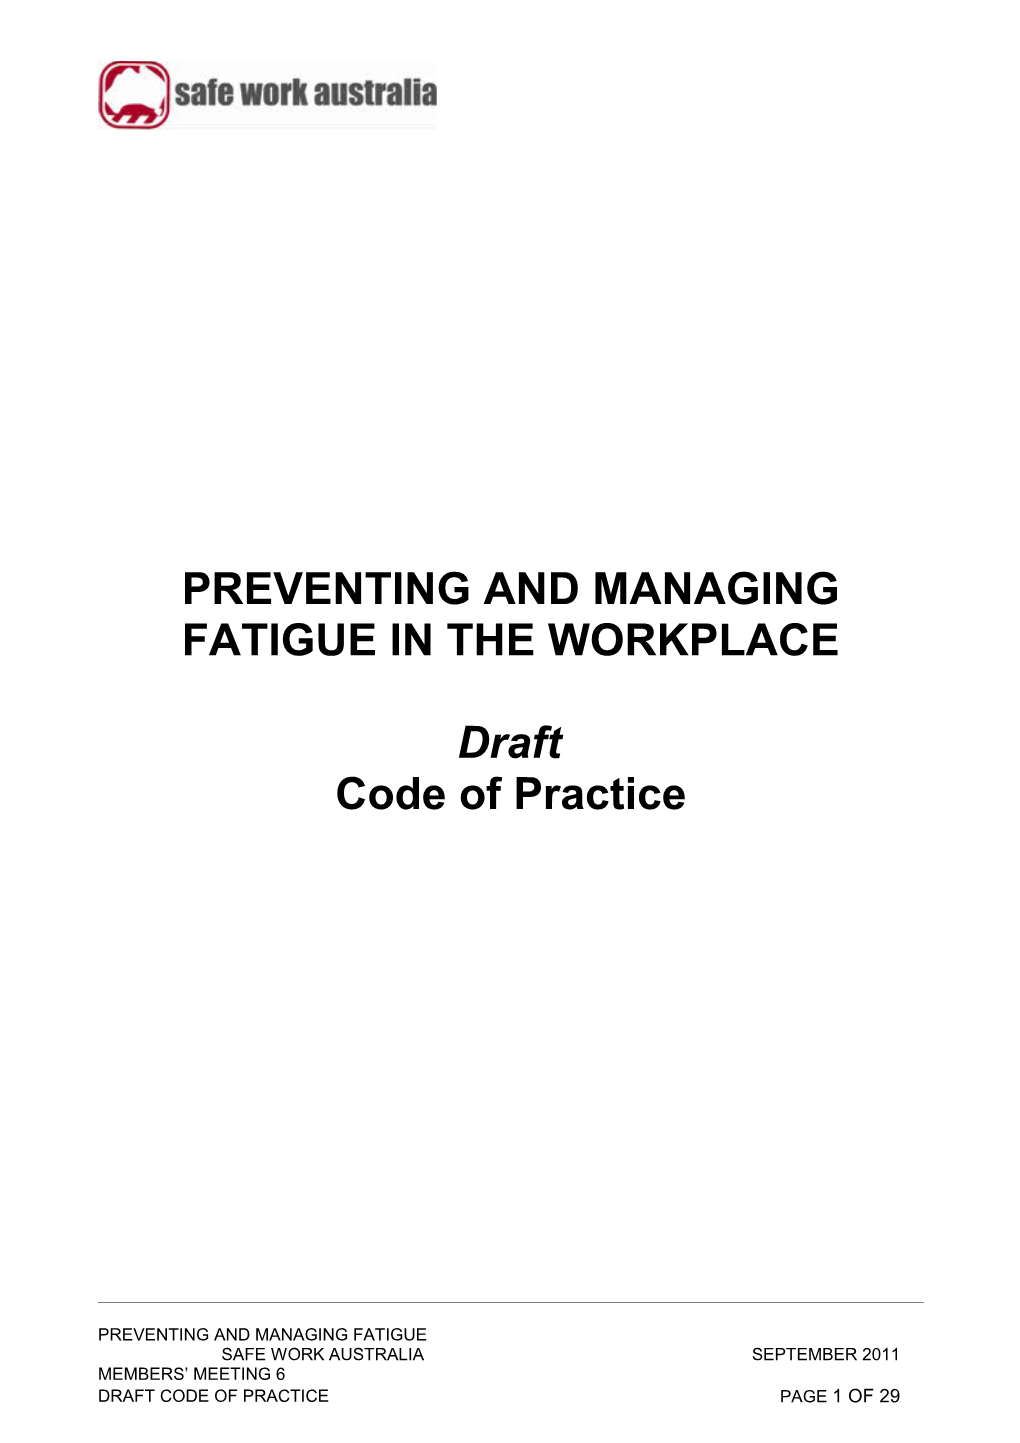 Preventing and Managing Fatigue in the Workplace